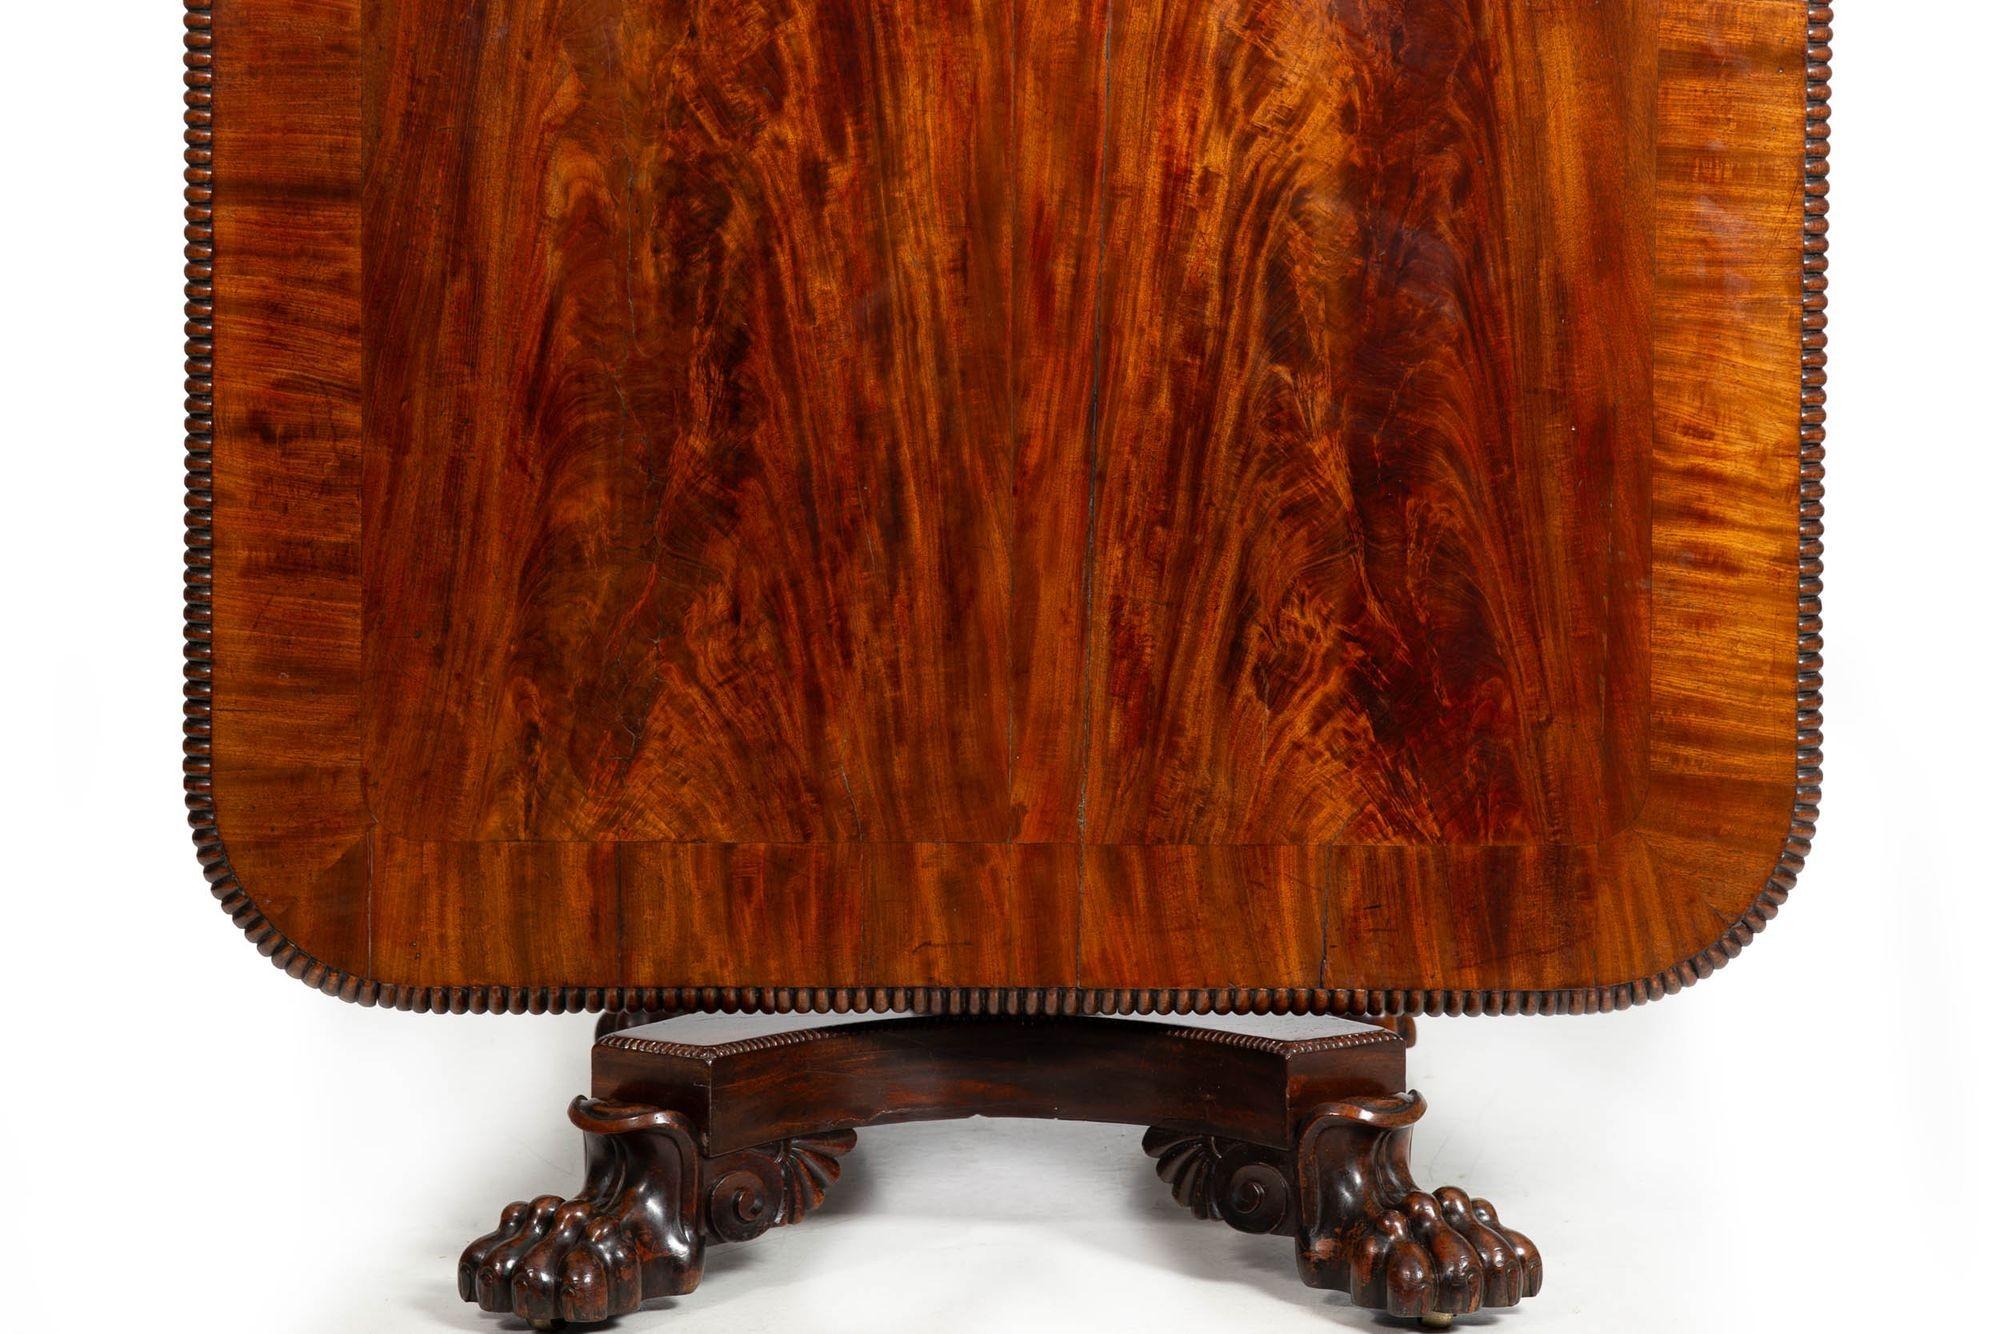 Circa 1840 English William IV Flame Mahogany Tilting Breakfast Table For Sale 4